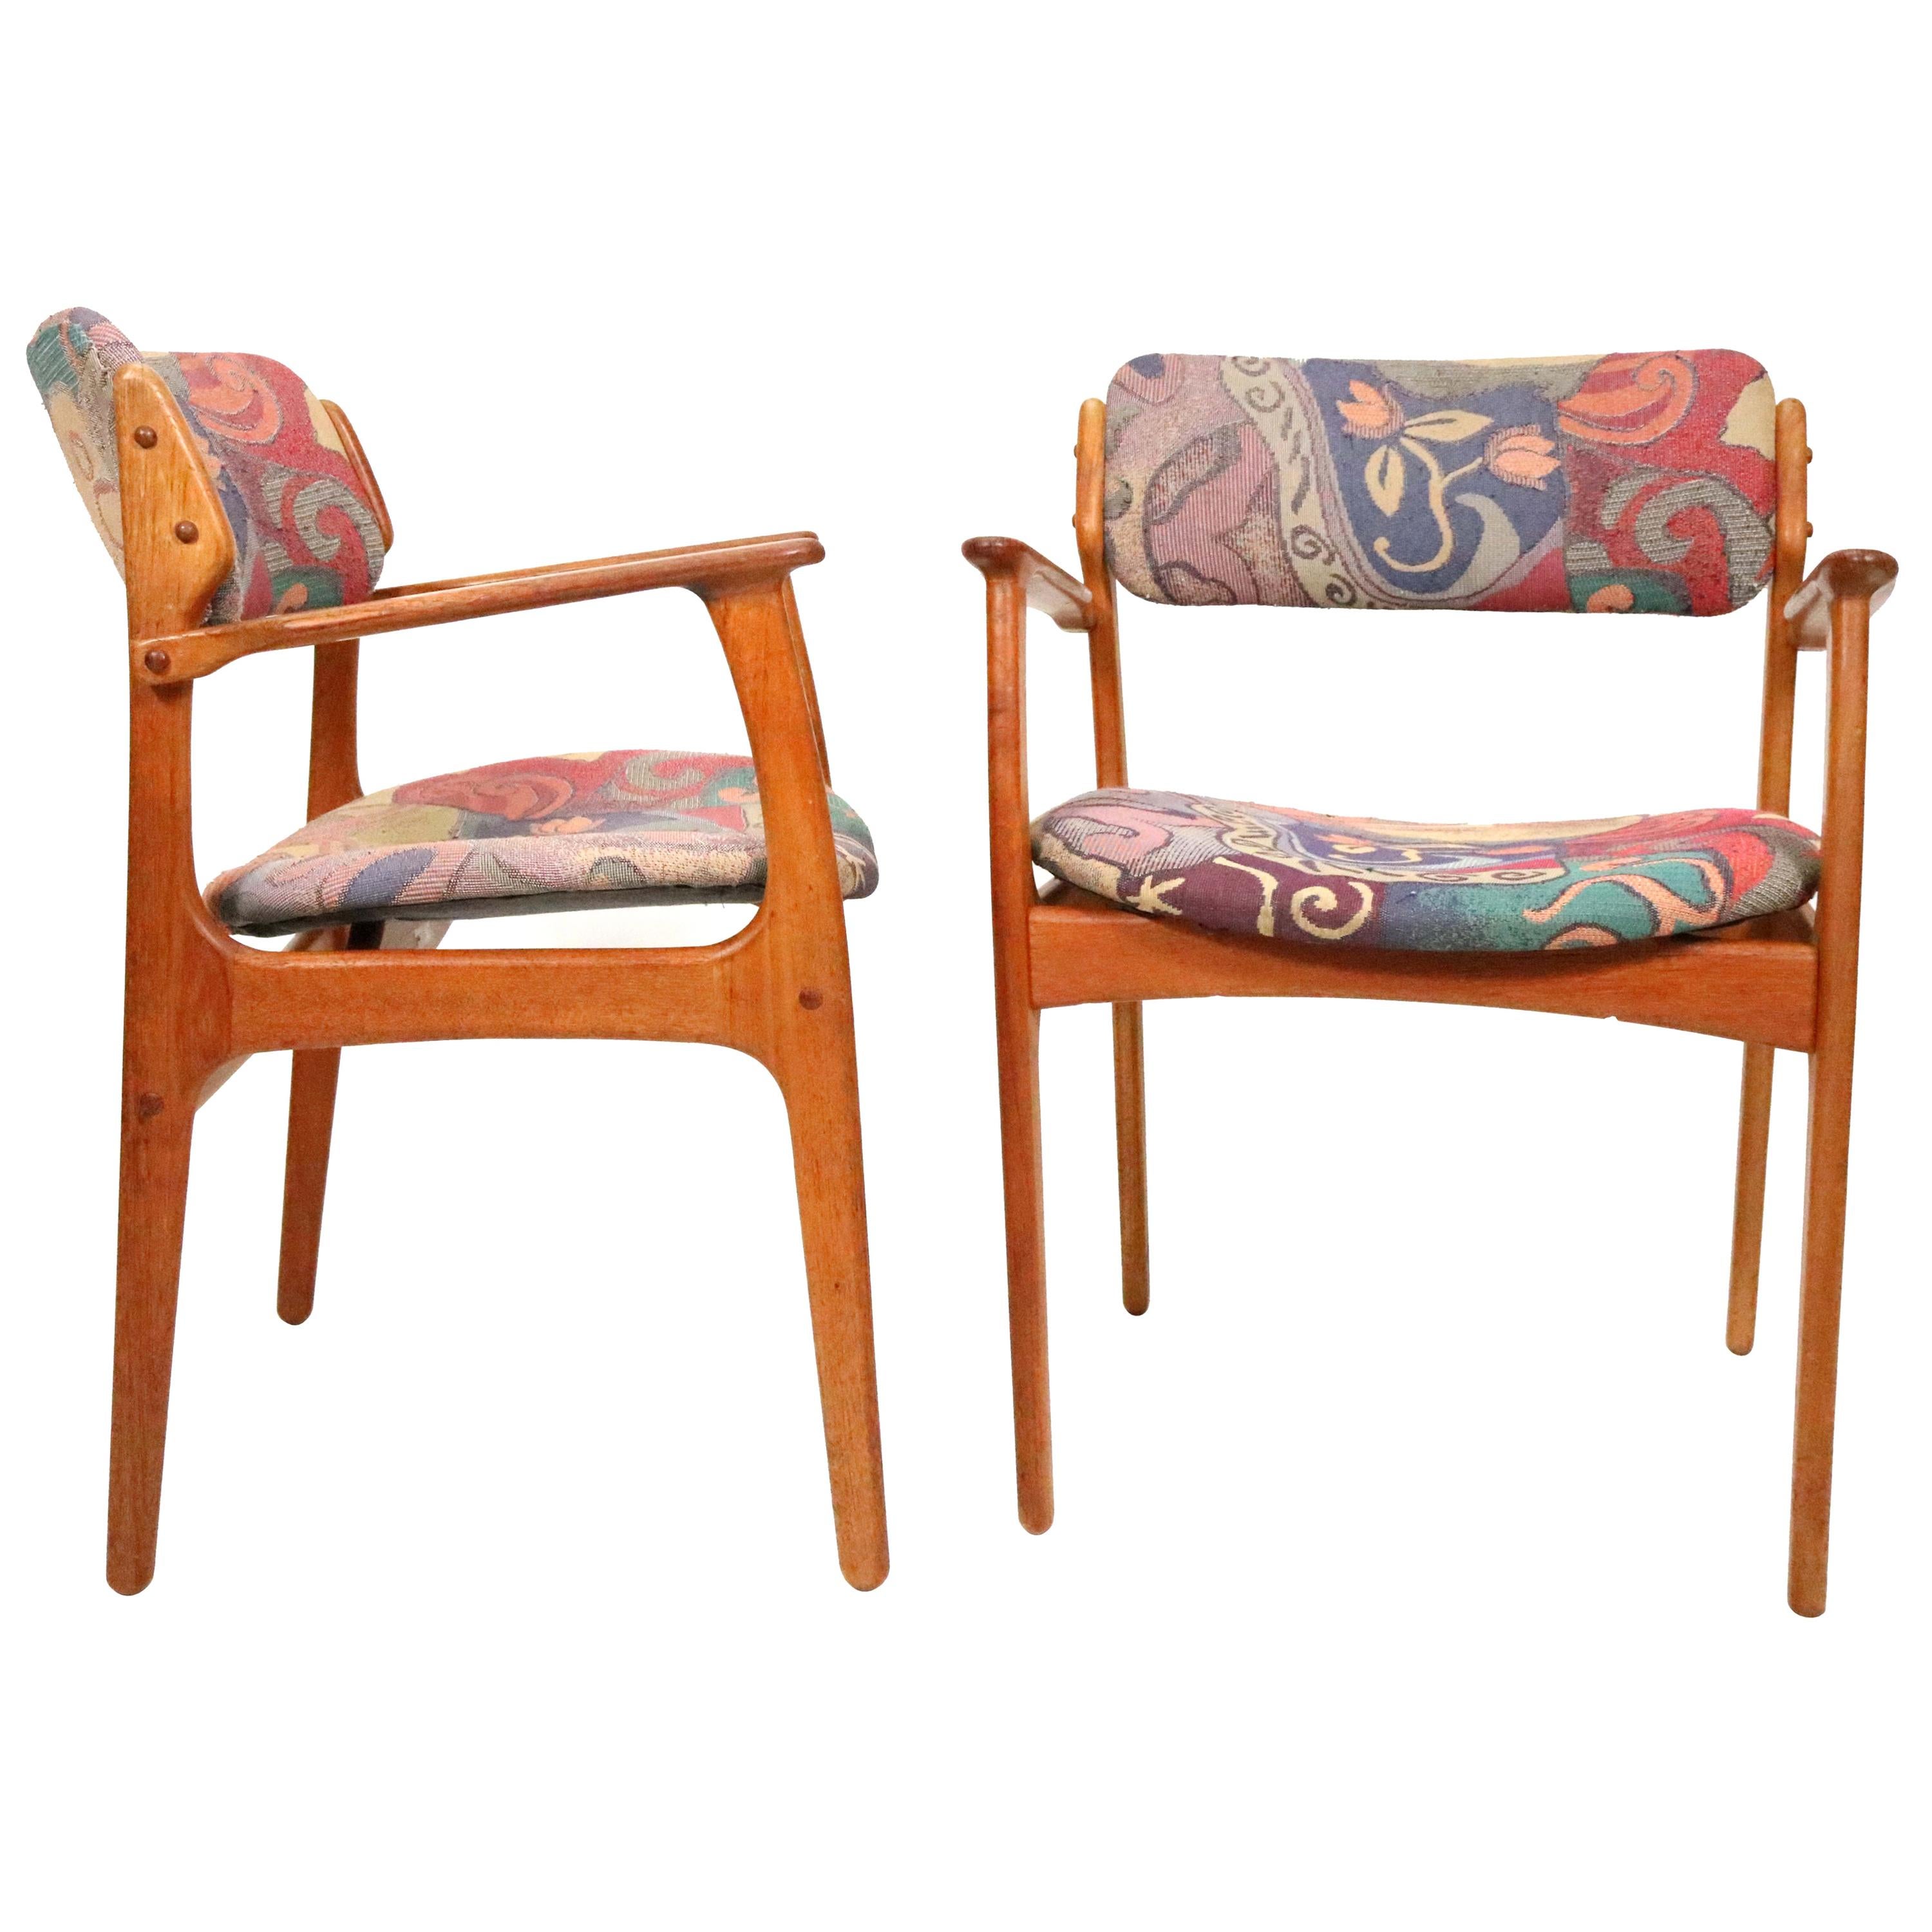 Pair of Midcentury Teak Dining Armchairs by Erik Buch for Oddense Maskinsned